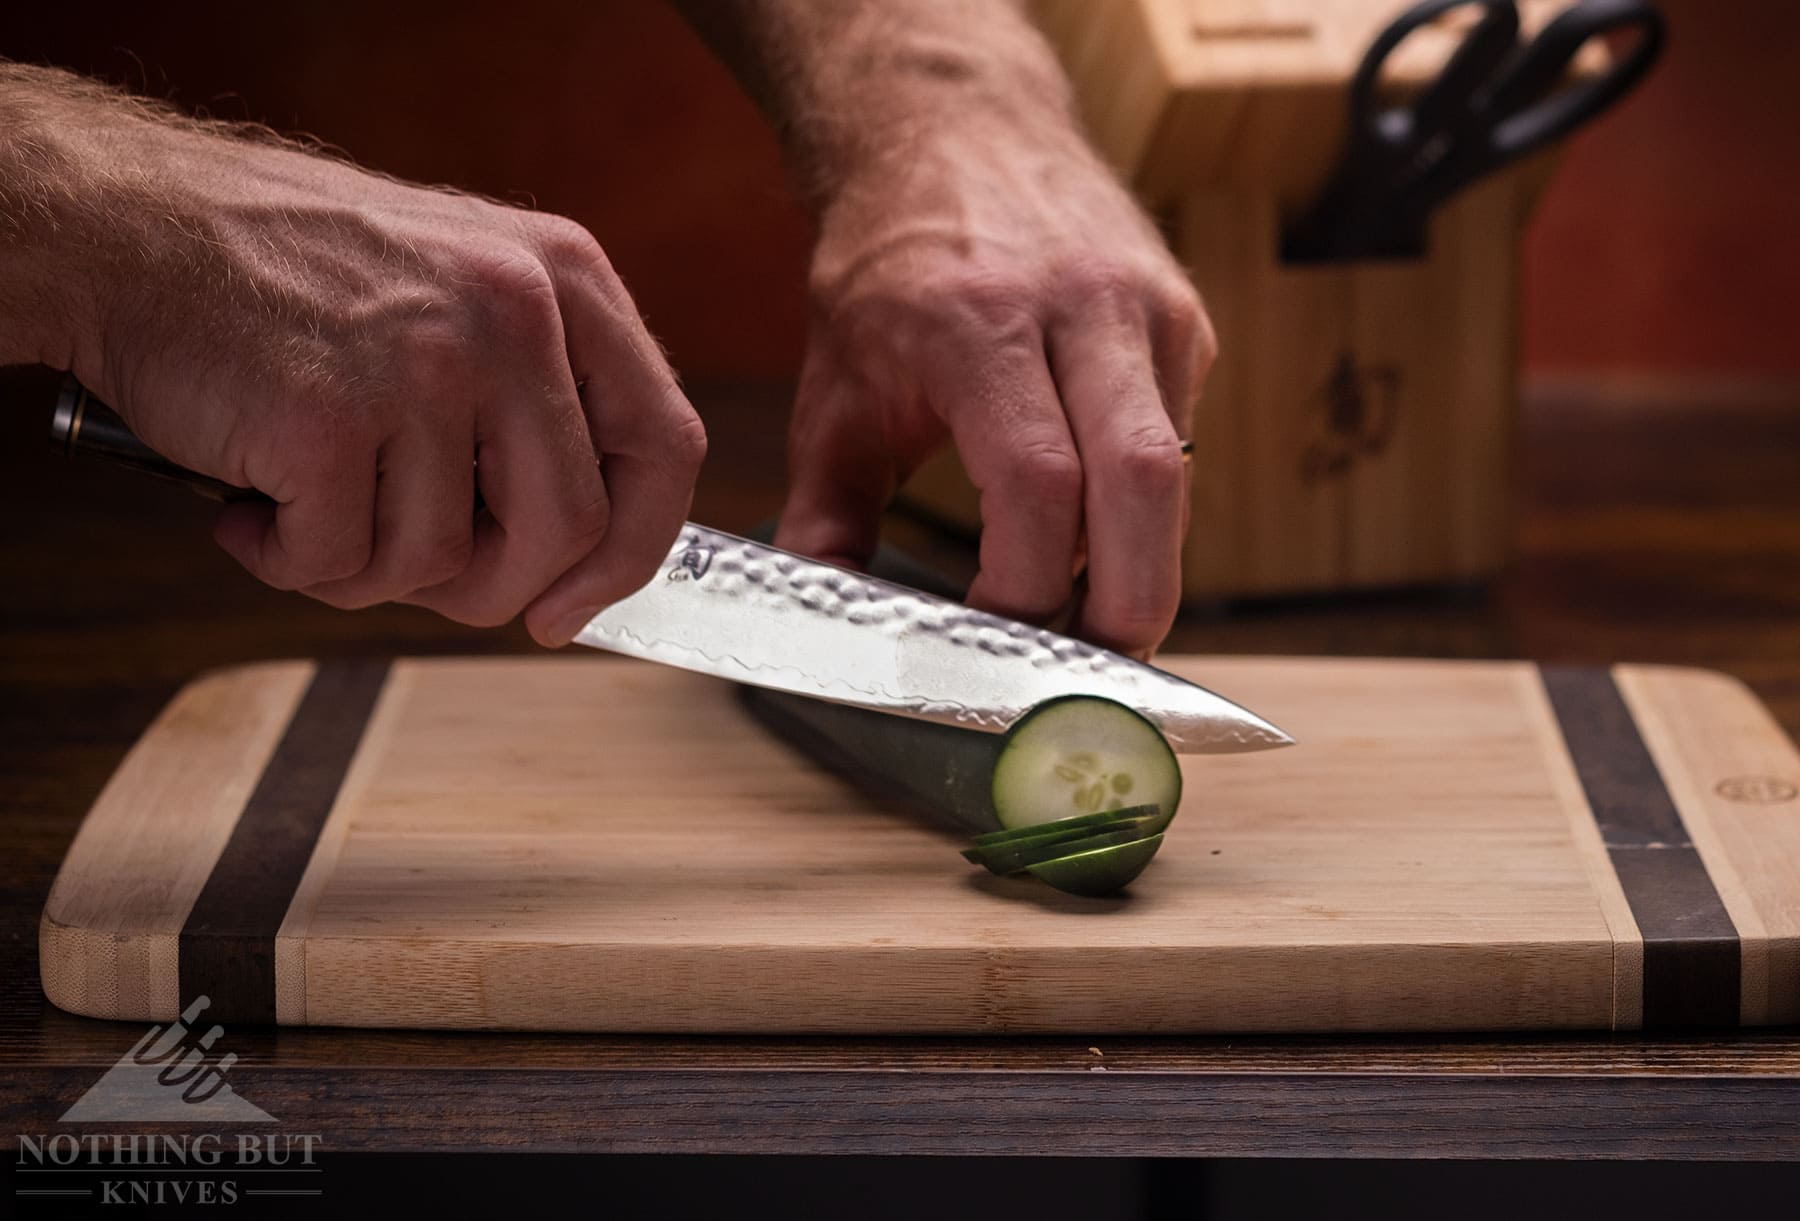 Slicing up a cucumber with the Shun Premier utility knife on a wood cutting board.